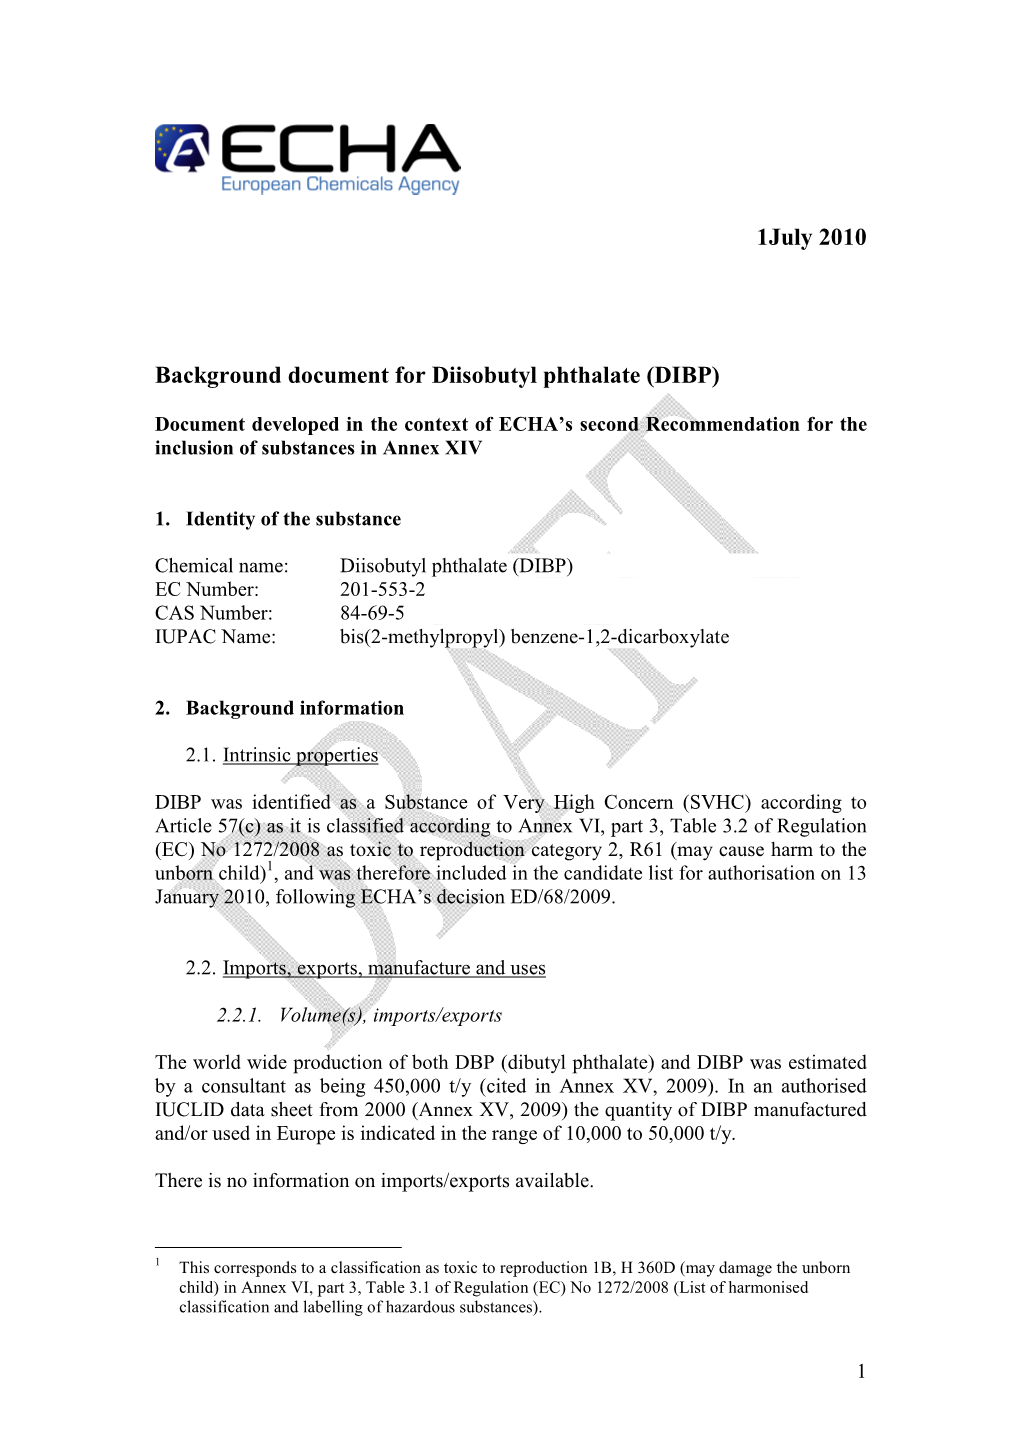 1July 2010 Background Document for Diisobutyl Phthalate (DIBP)